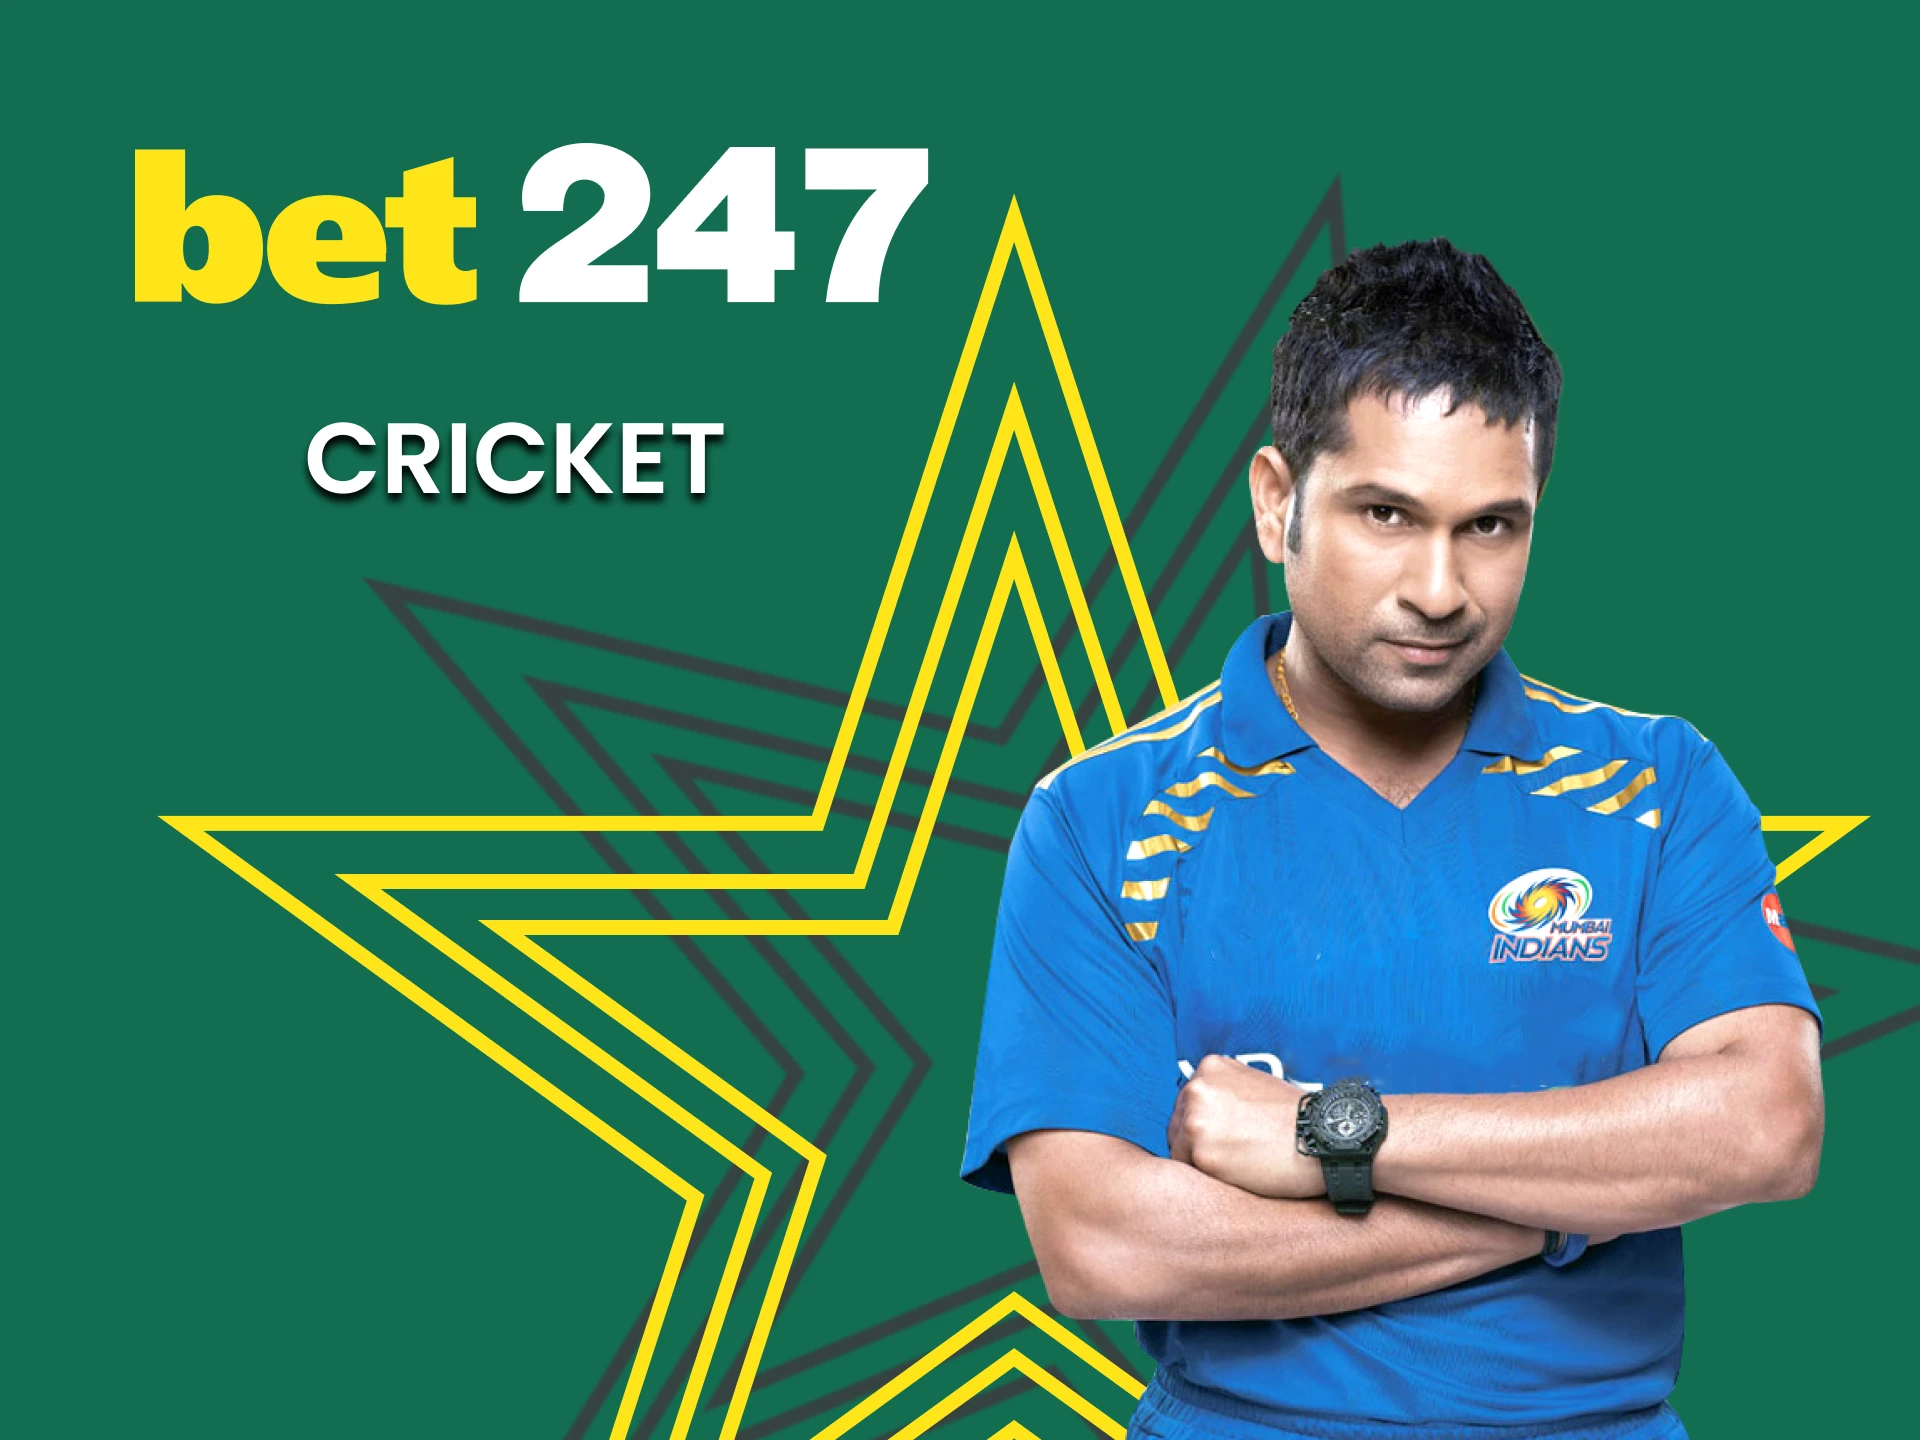 Bet on cricket at Bet247.